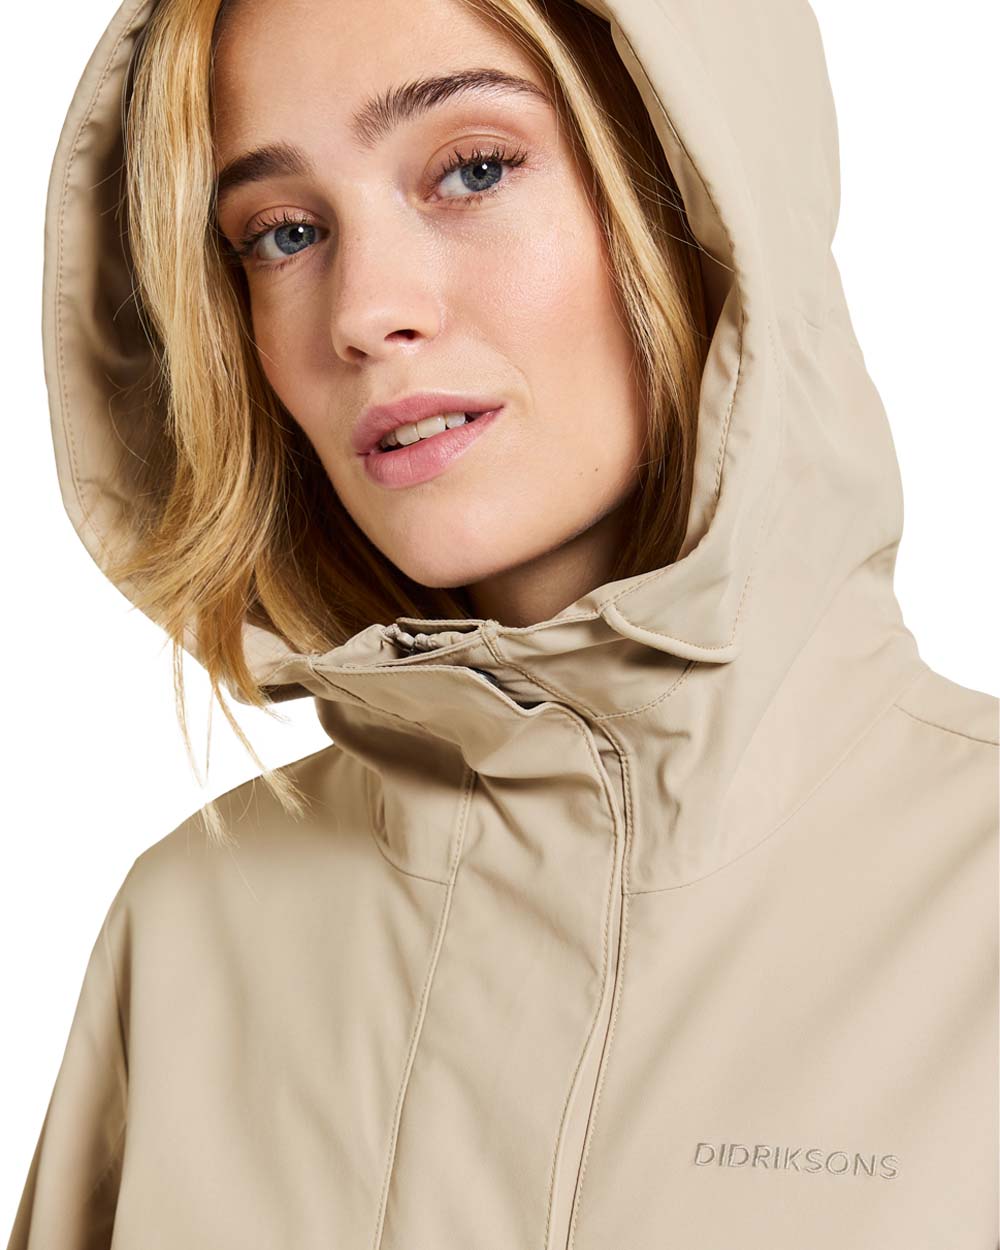 Clay Beige coloured Didriksons Womens Parka on White background 